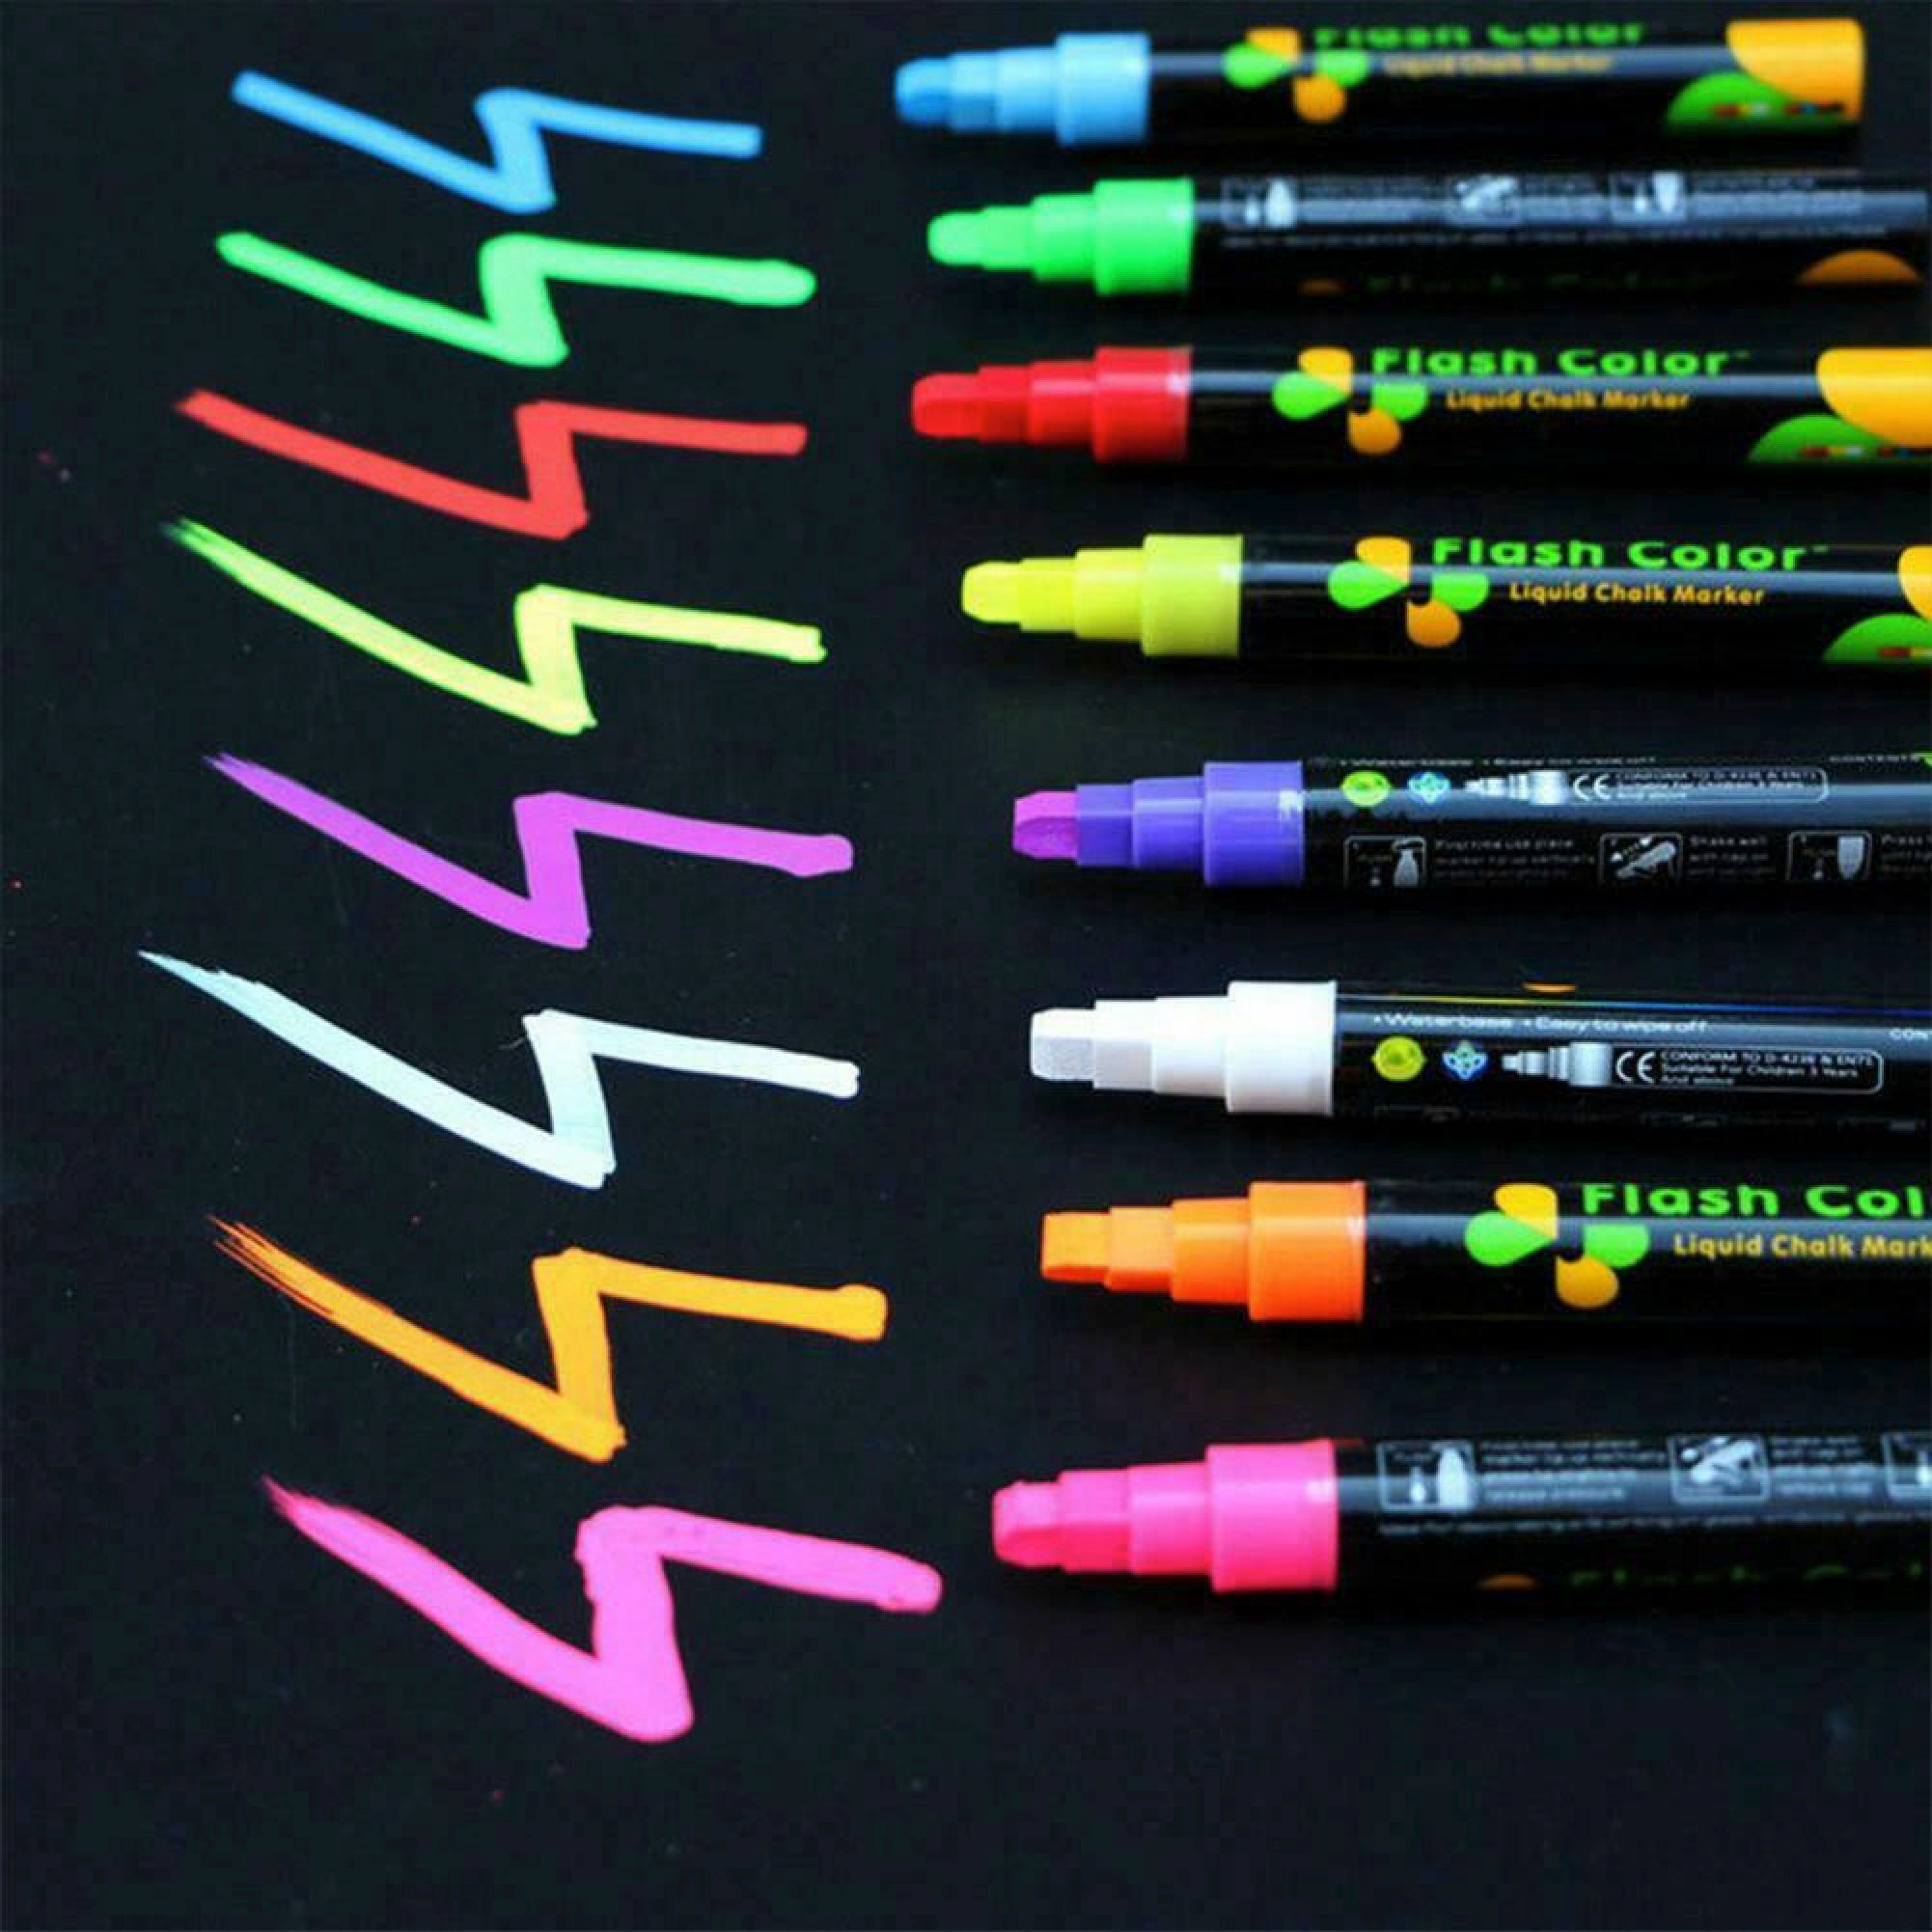 6mm Reversible Tip Wet Erase Chalk Pens Neon or Earth Tones, 8/pack, Red,  Blue, Green, Pink, Purple, Yellow, Etc FREE SHIPPING 